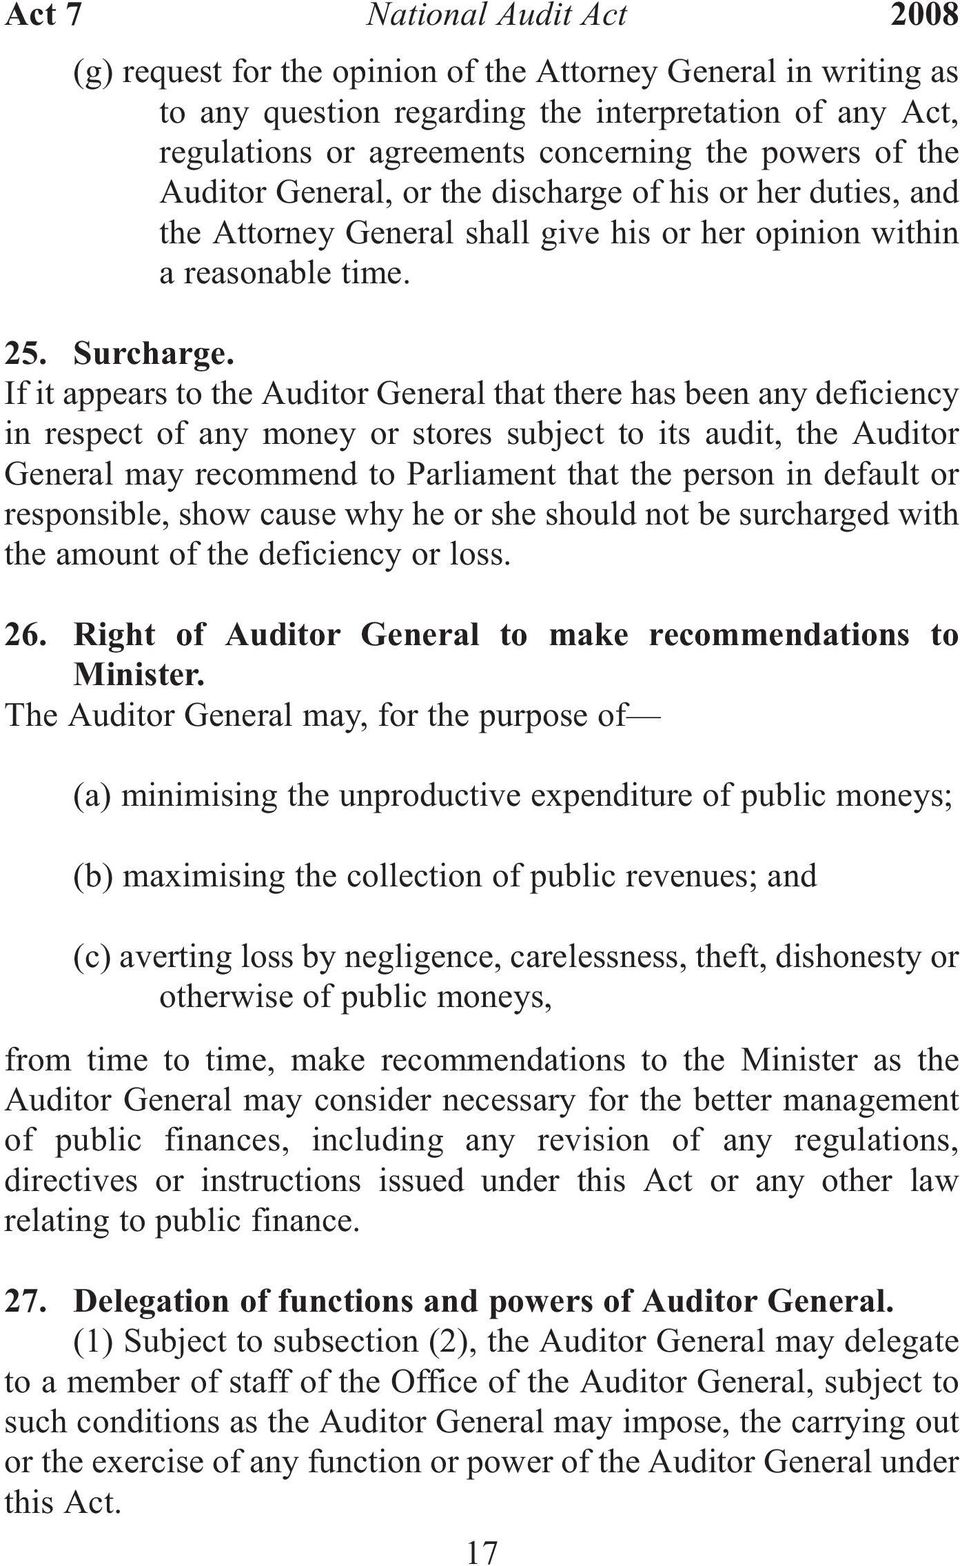 If it appears to the Auditor General that there has been any deficiency in respect of any money or stores subject to its audit, the Auditor General may recommend to Parliament that the person in